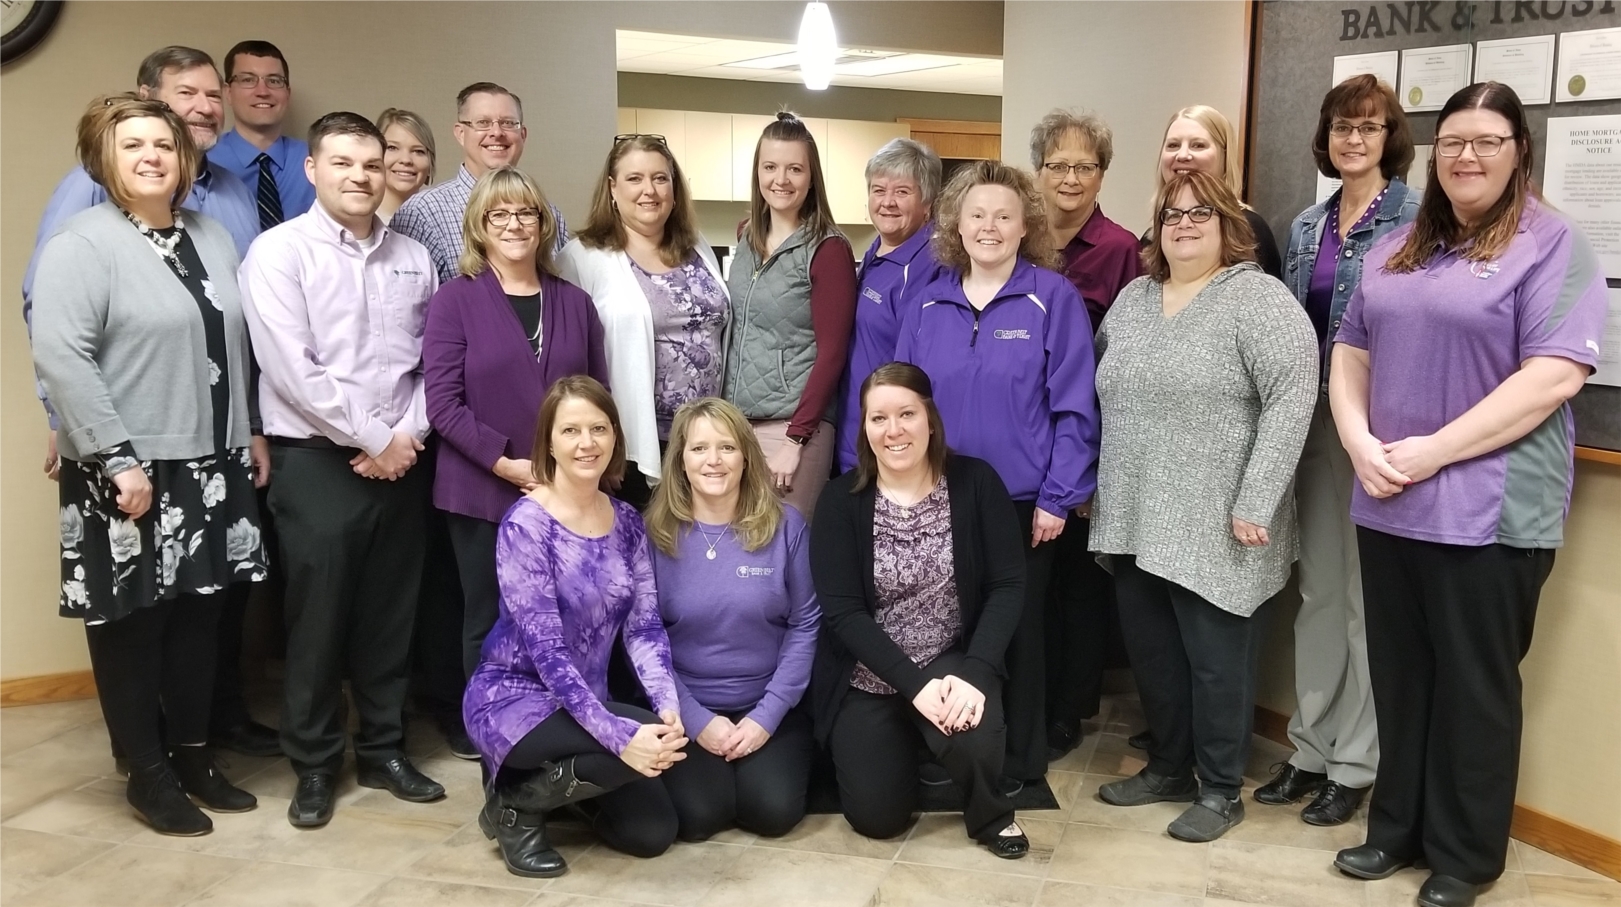 Our bank has been the top fundraising team in Hardin County for the American Cancer Society's Relay for Life for multiple years in a row.  "Team Green" is dedicated and works great together to raise funds for this cause.